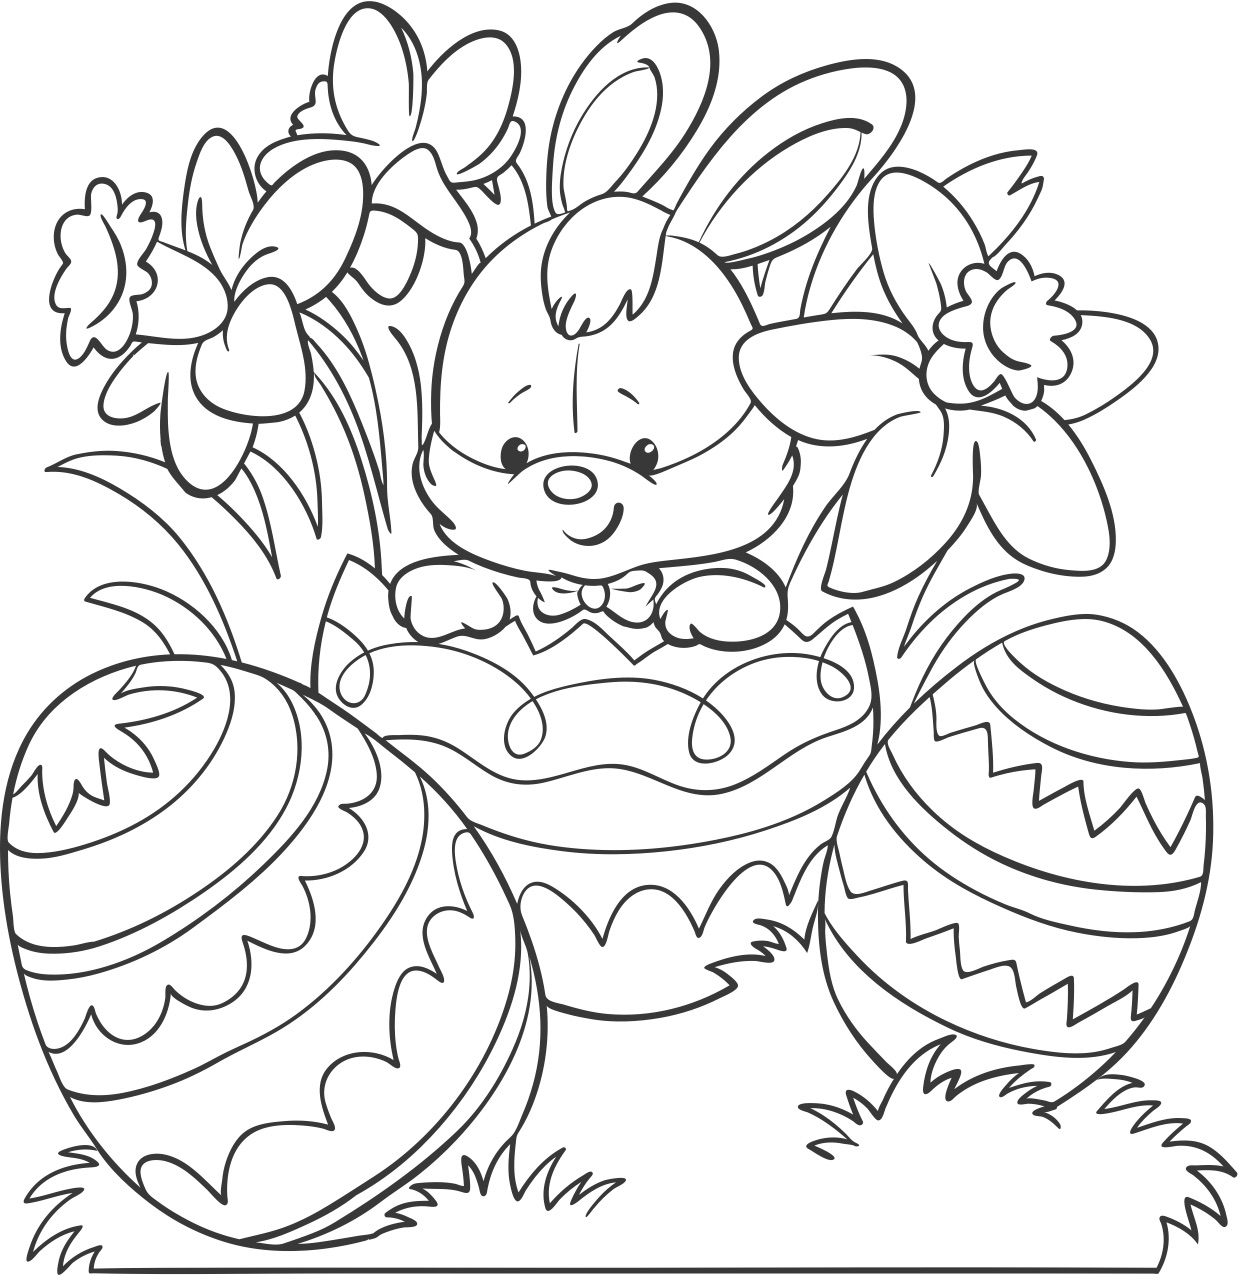 Easter Colouring Download - Print what matters